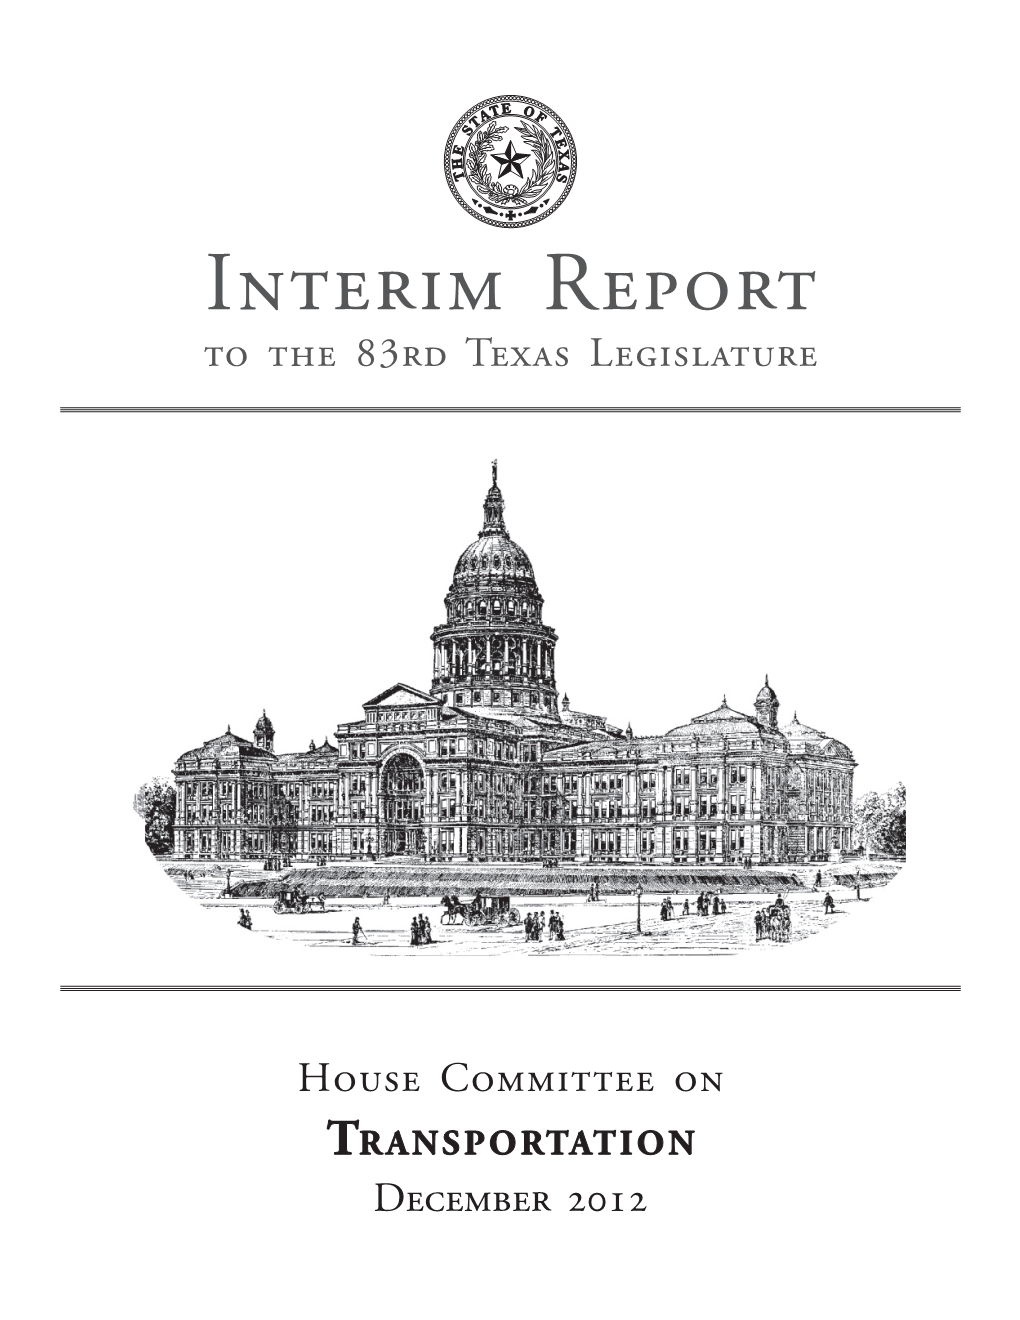 House Committee on Transportation December 2012